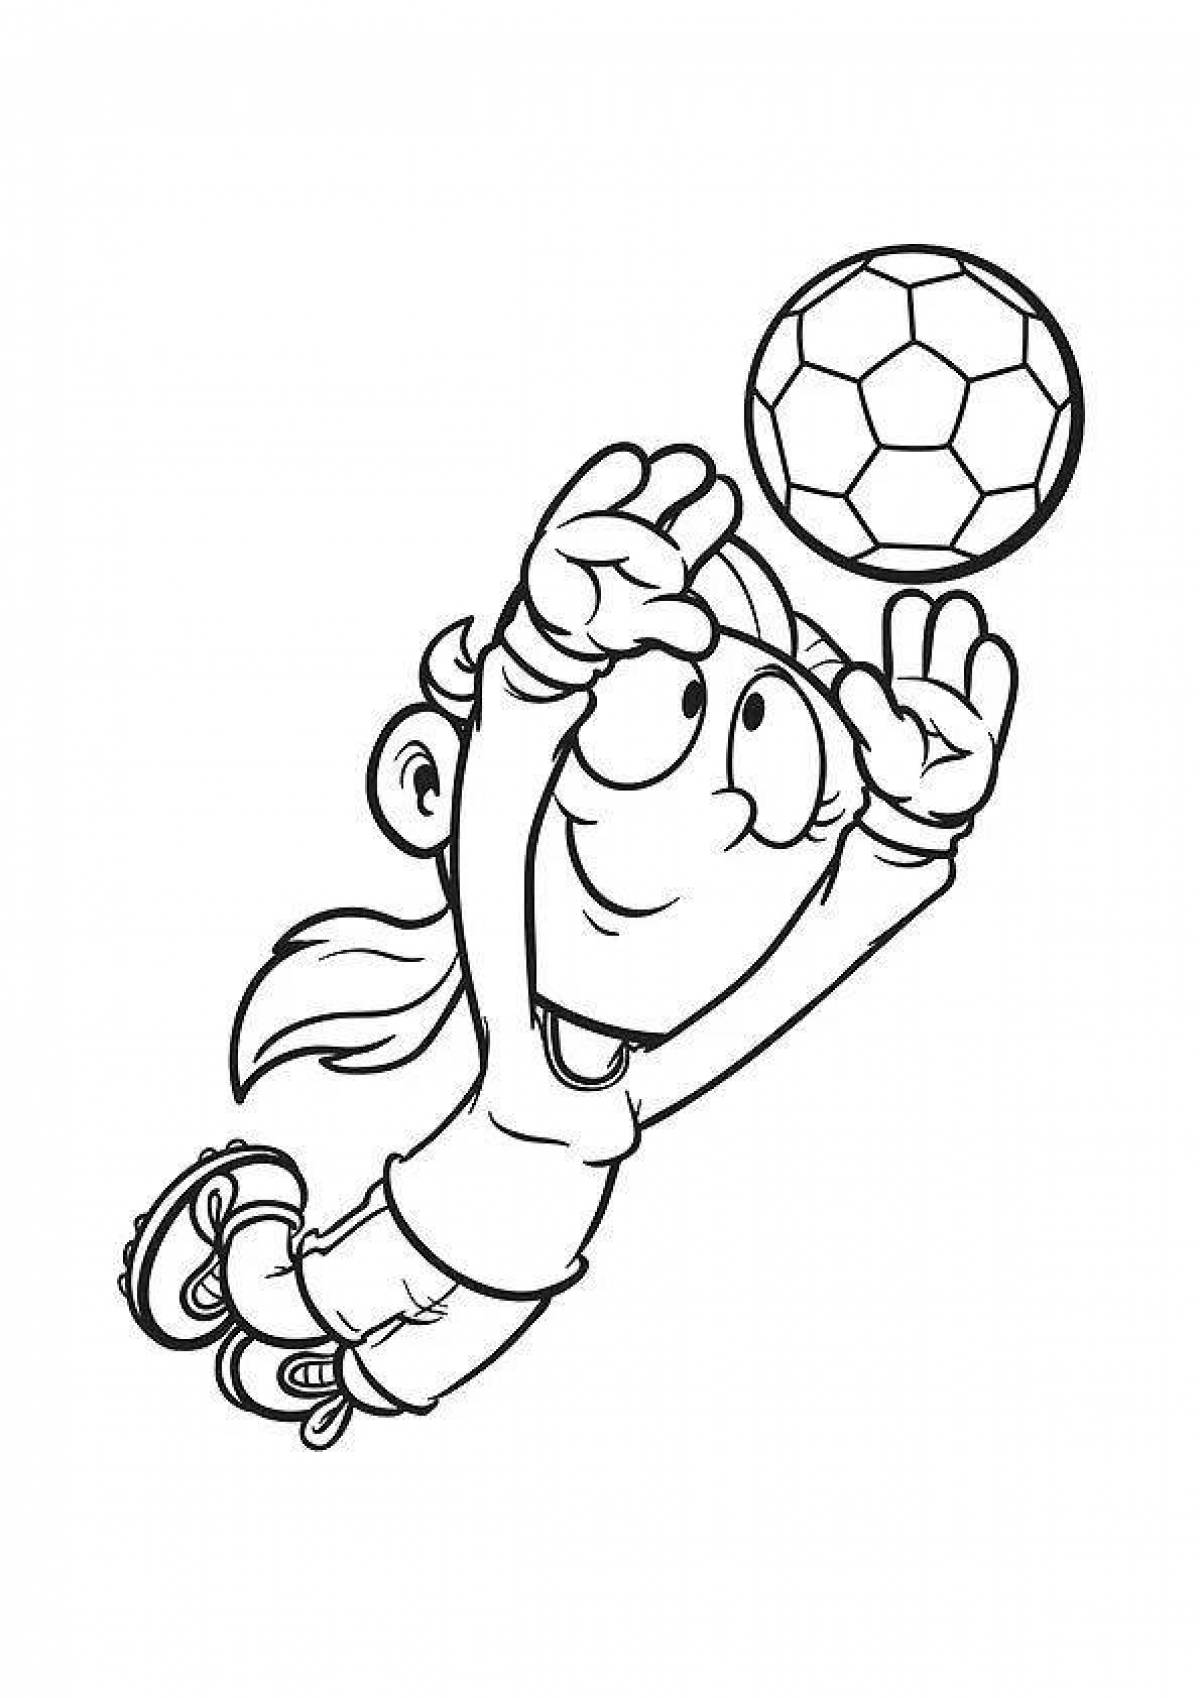 Coloring page playful football goalkeeper